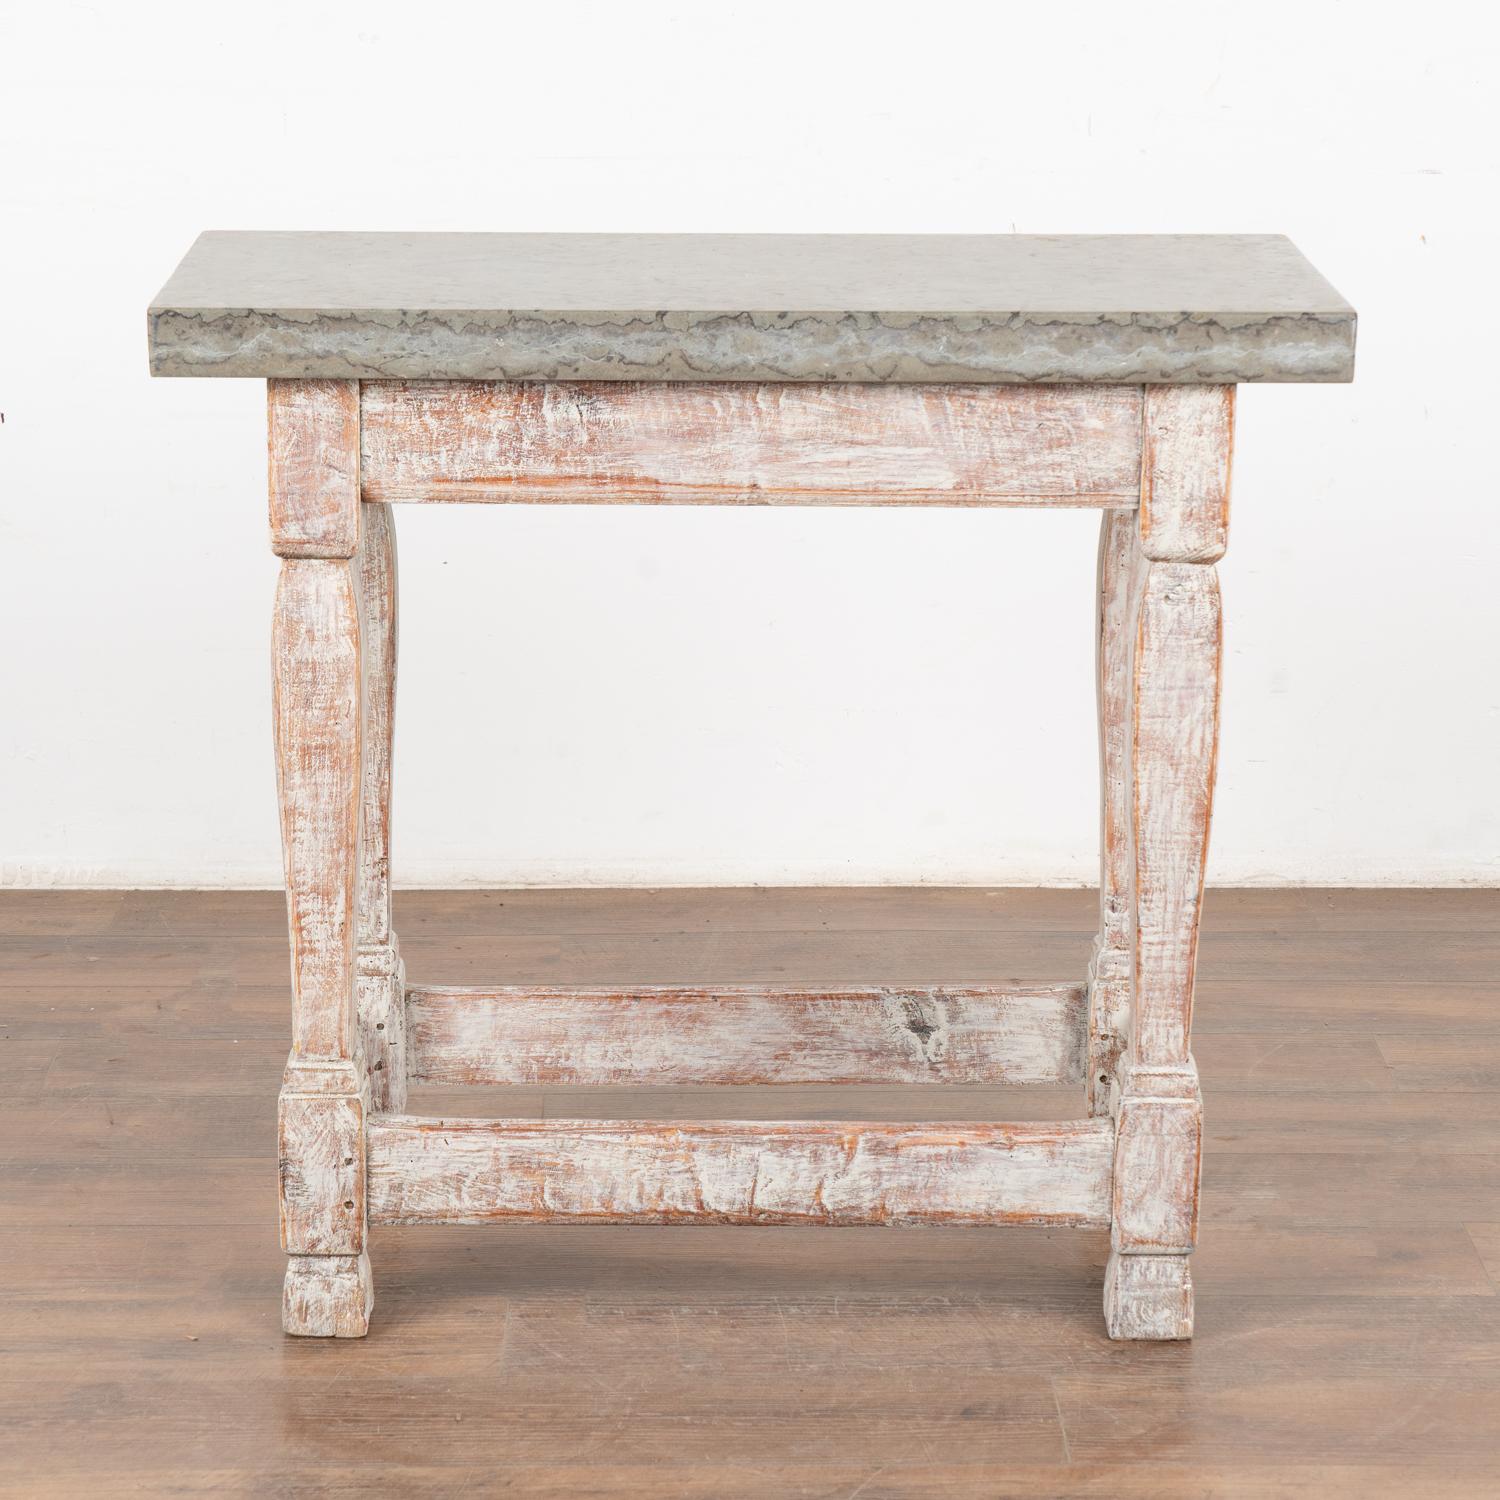 Baroque Stone Top Side Table Small Console Table, Sweden circa 1800-40 For Sale